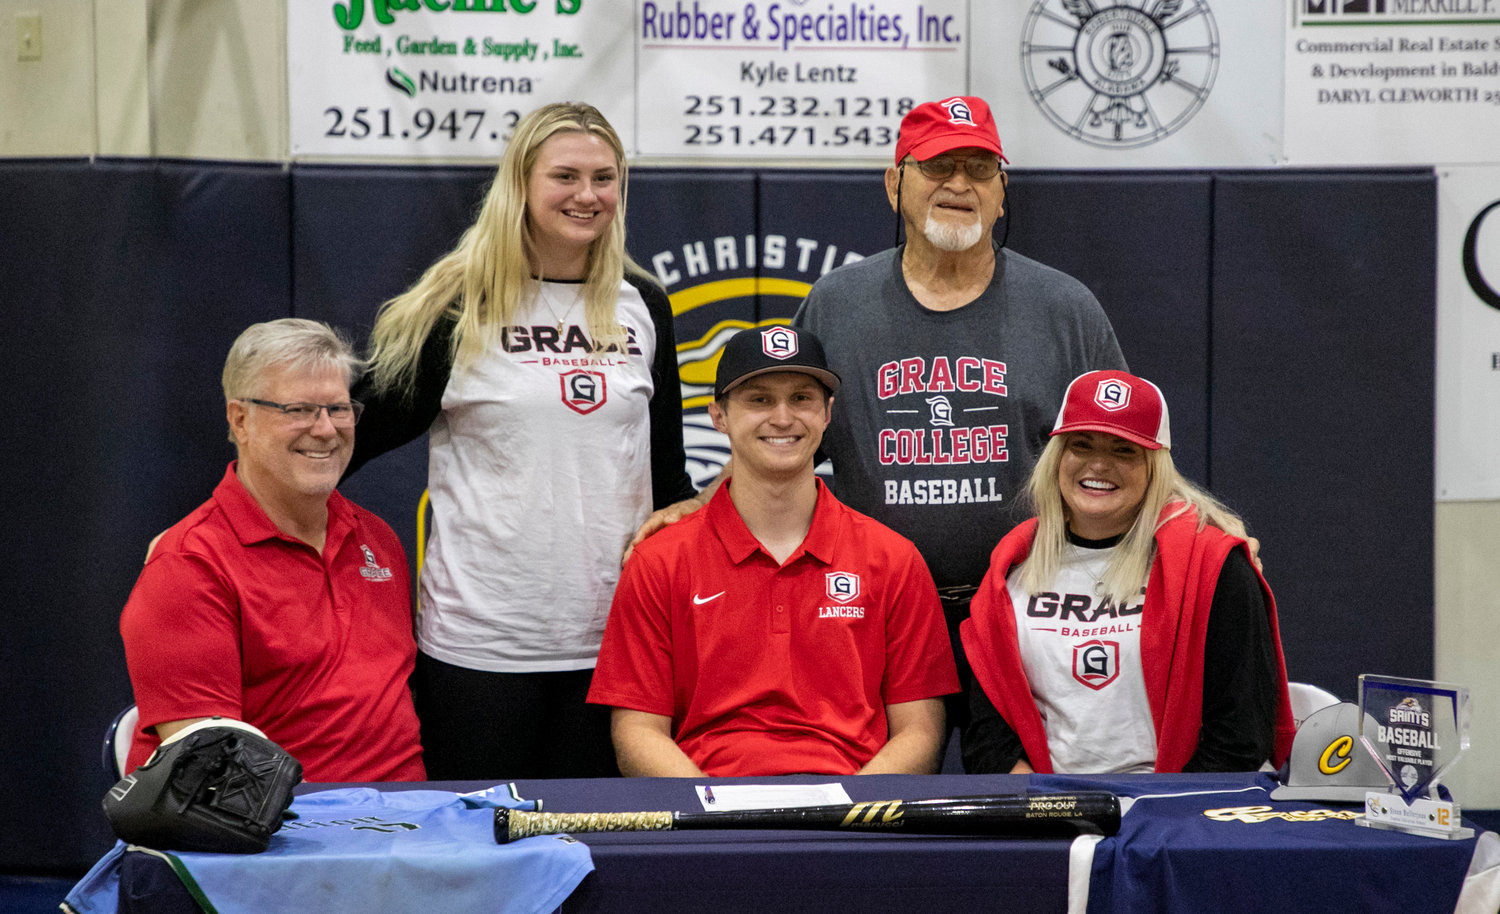 Steen Bellerjeau was joined by family in penning his commitment to the Grace Lancers’ baseball program during a ceremony Monday, April 10, at Central Christian School in Robertsdale. So far this season, Bellerjeau has collected a .613 batting average with 19 RBIs to complement a 1.75 ERA with 37 strikeouts in 16 innings pitched.